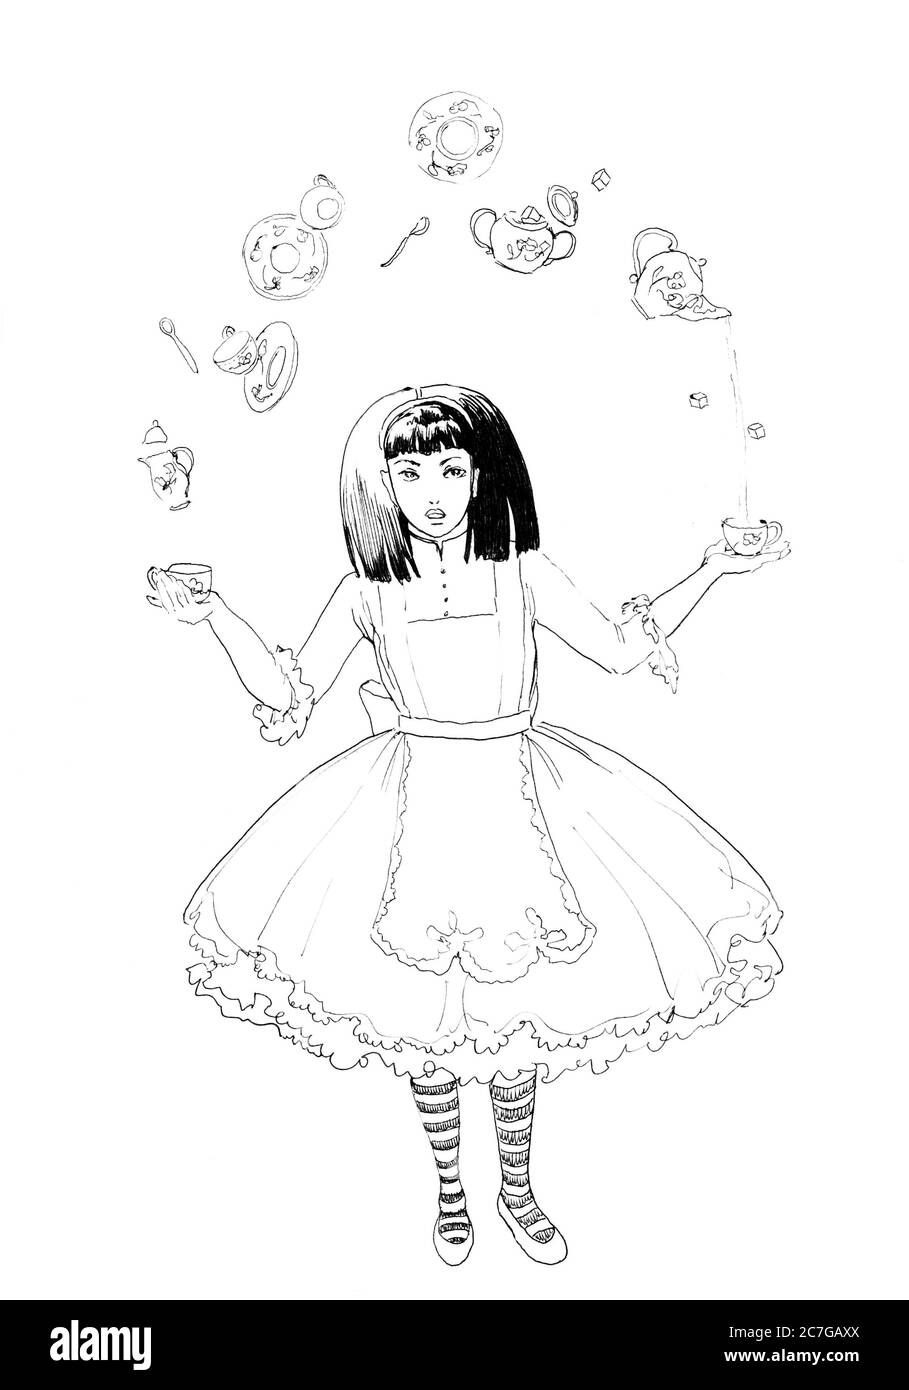 Mad Tea Party of Alice. Hand drawn illustration of young black haired girl with different tea equipment . Pen drawing on white background Stock Photo